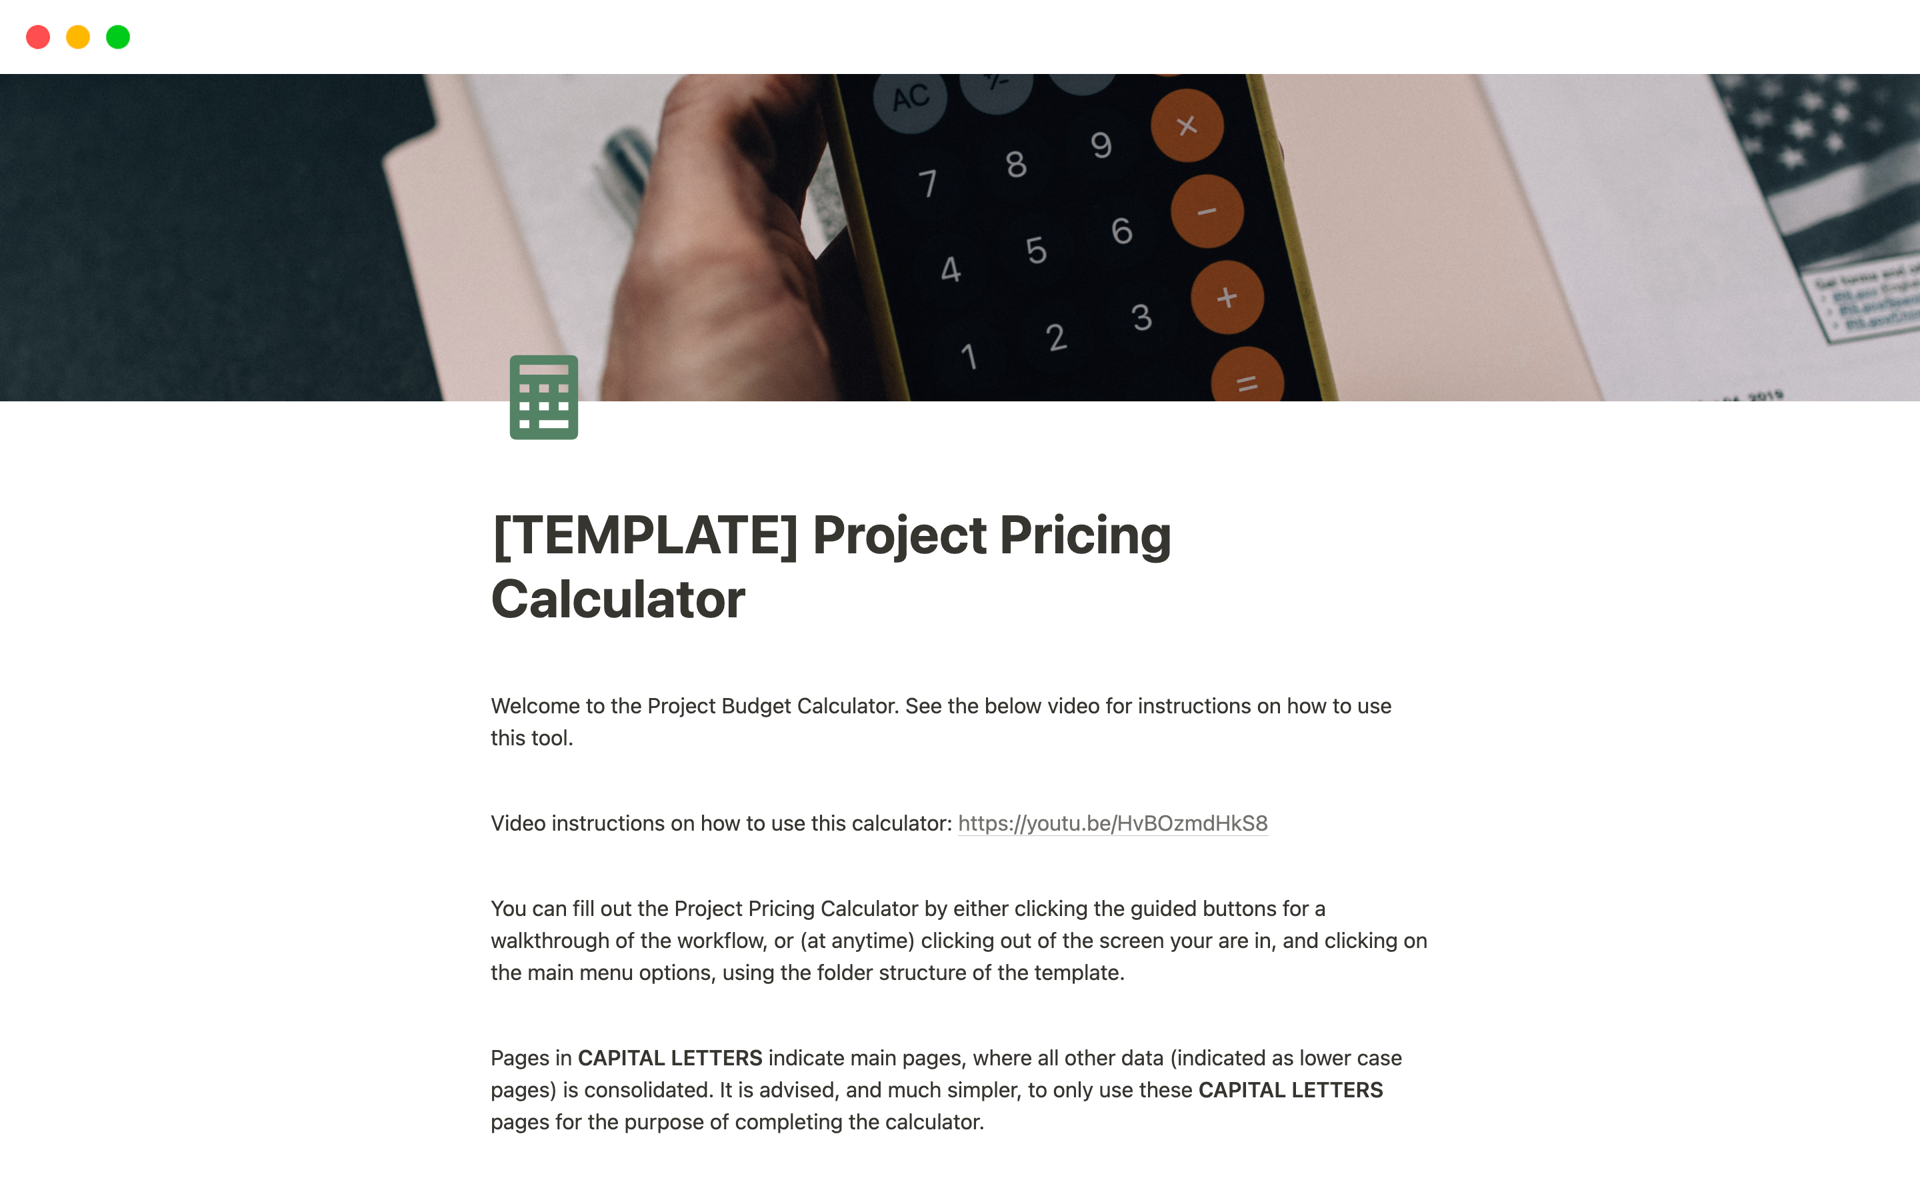 This easy to use Notion template will walk you through step by step the process of pricing/costing any project.